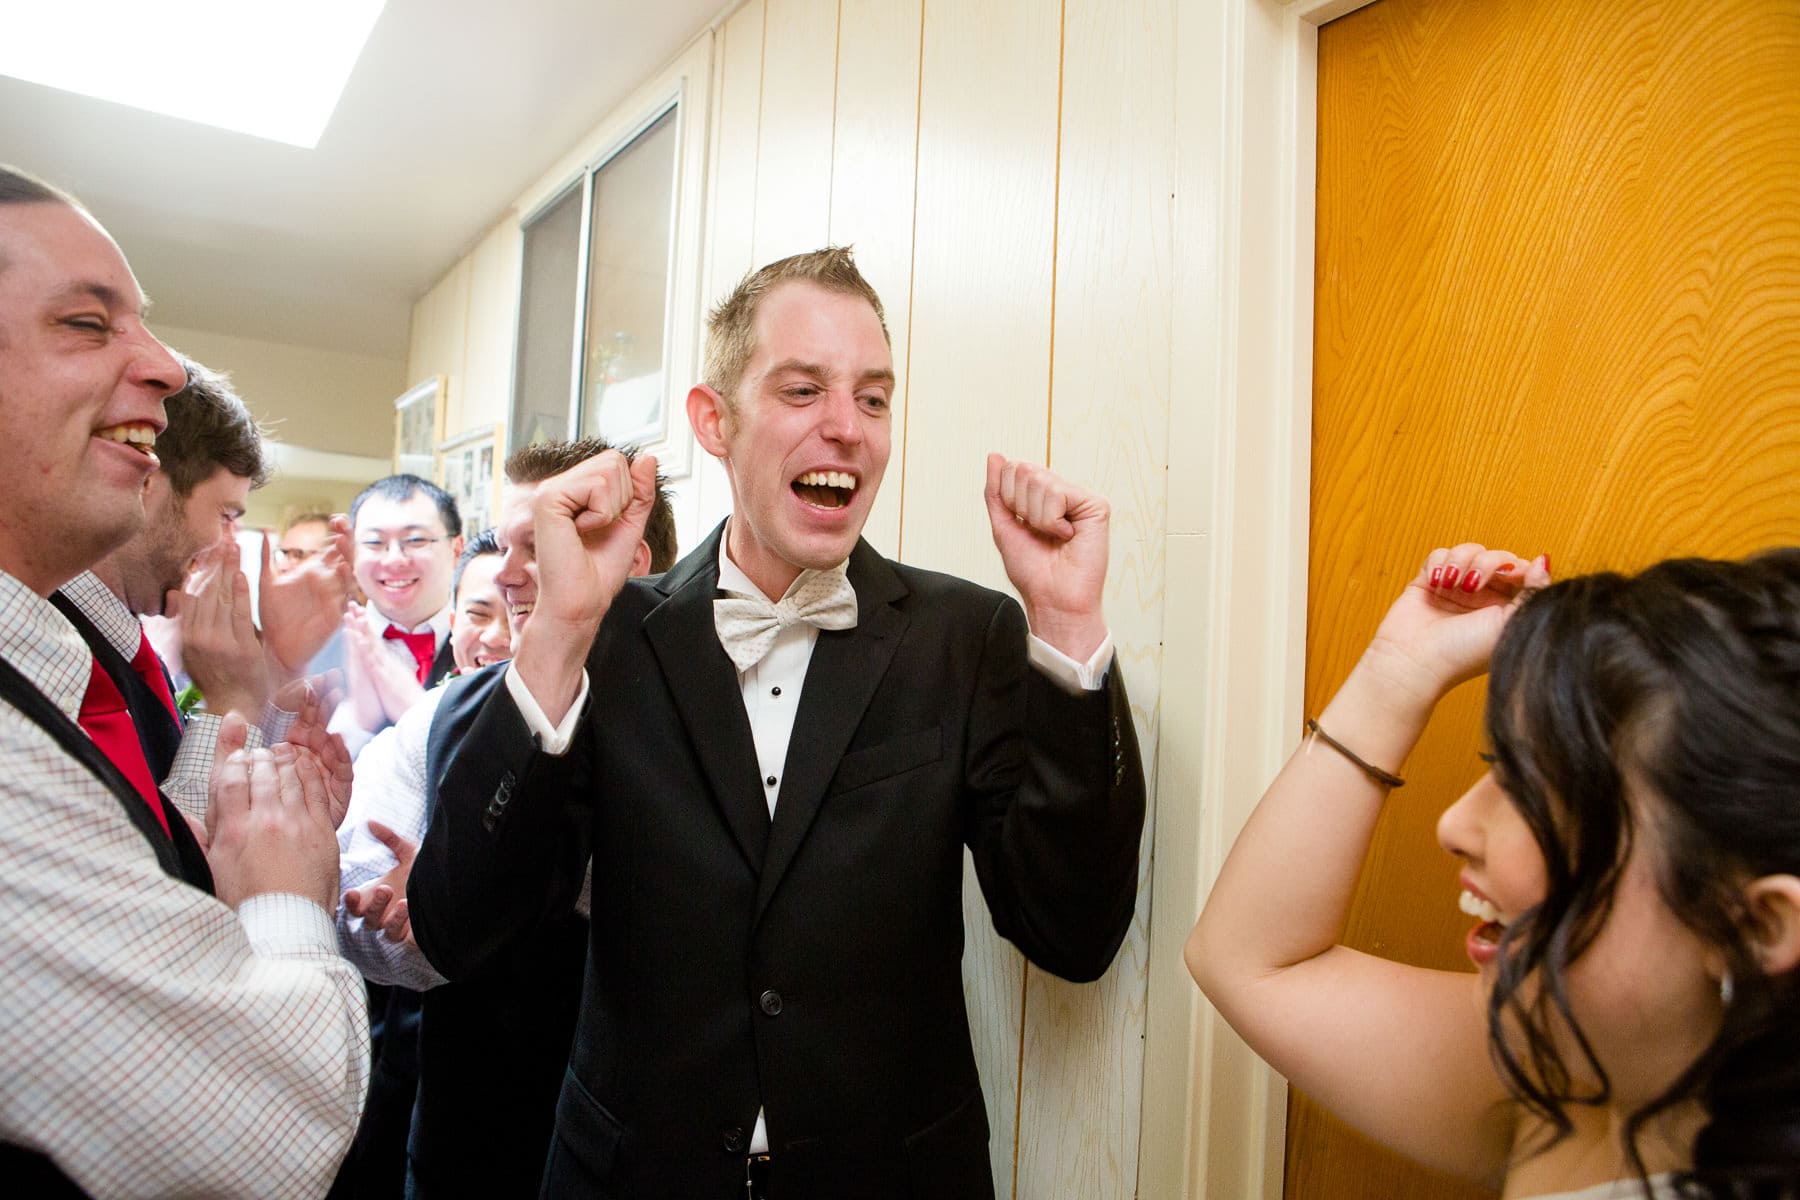 Groom celebrating after answering door games questions